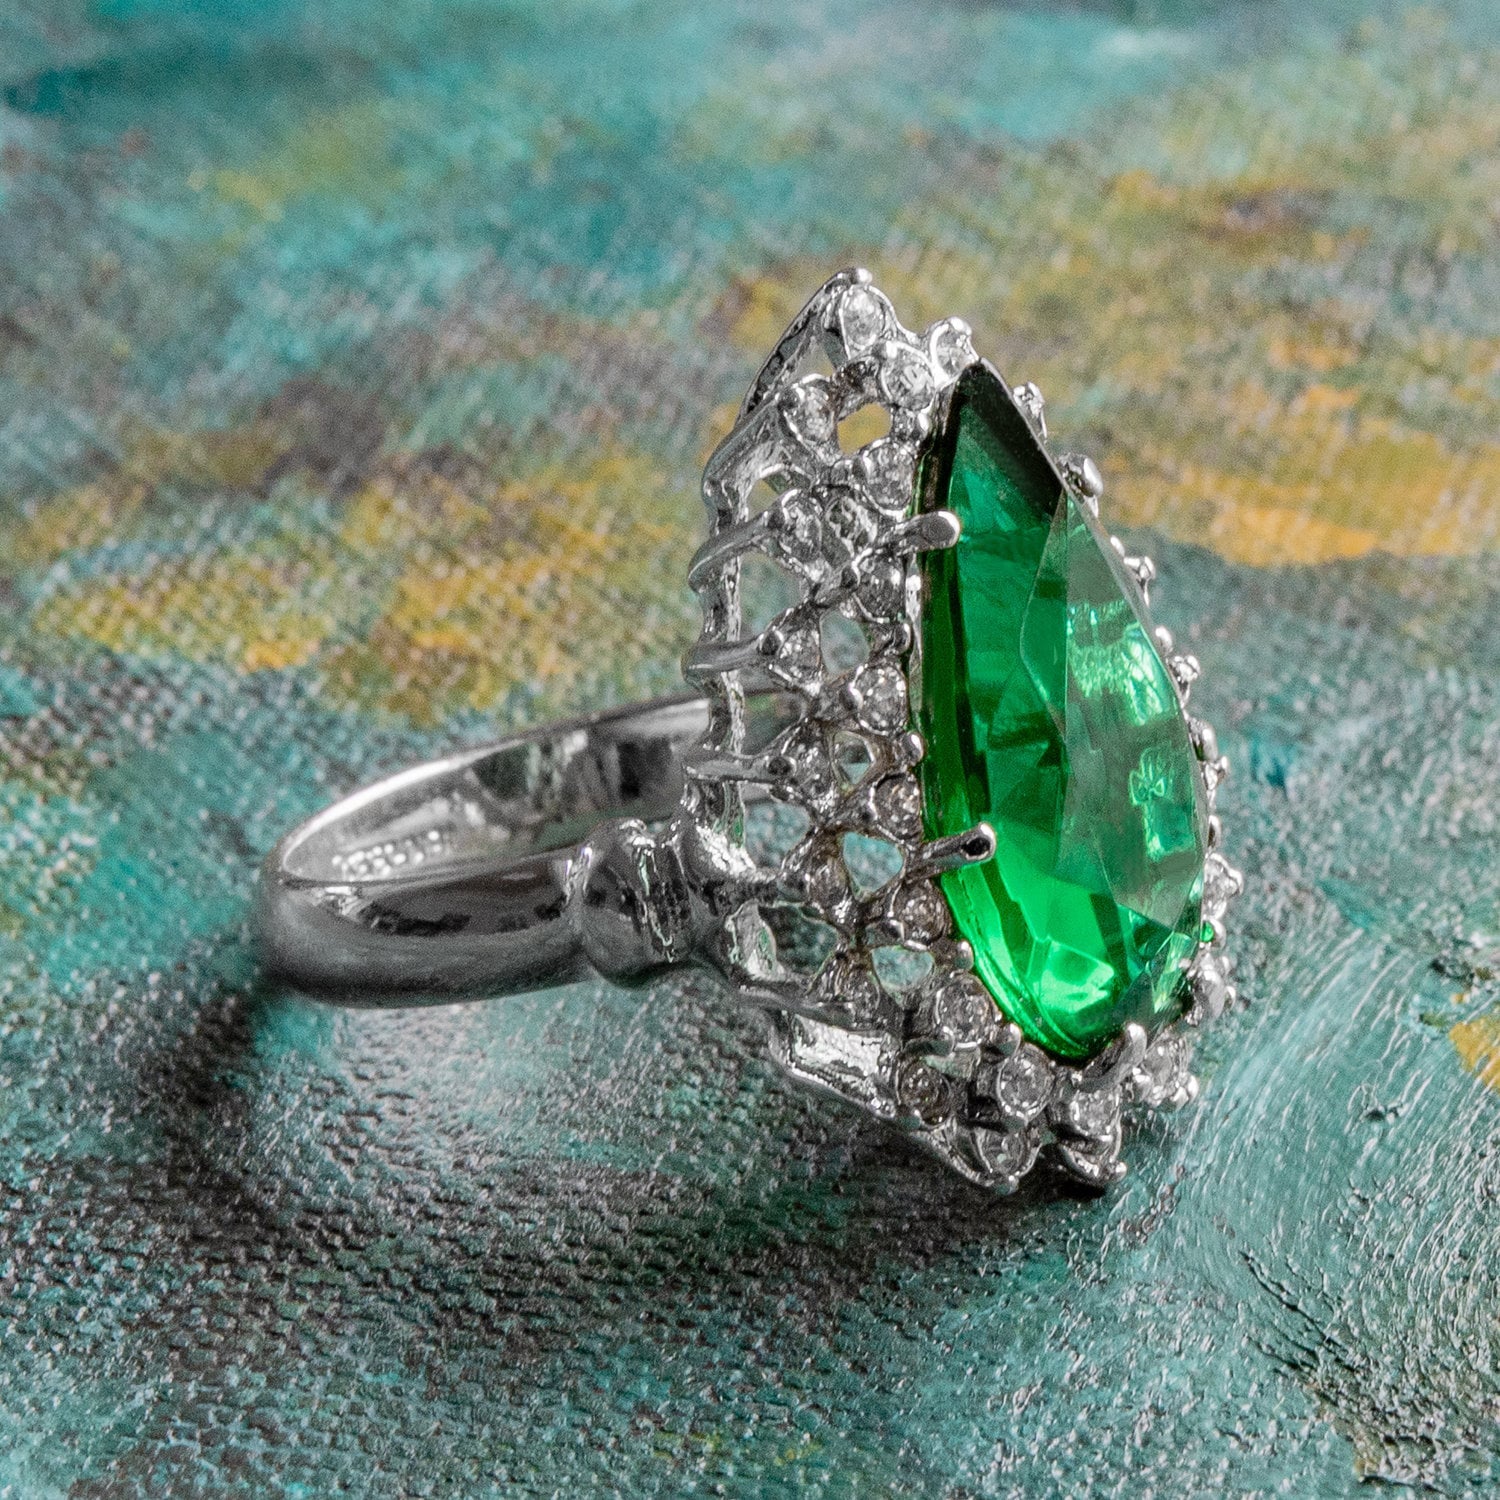 Buy Emerald Cocktail Ring, Emerald Crystal Ring, Statement Gold Crystal Emerald  Ring, Adjustable Cocktail Ring, Statement Emerald Gold Ring. Online in  India - Etsy